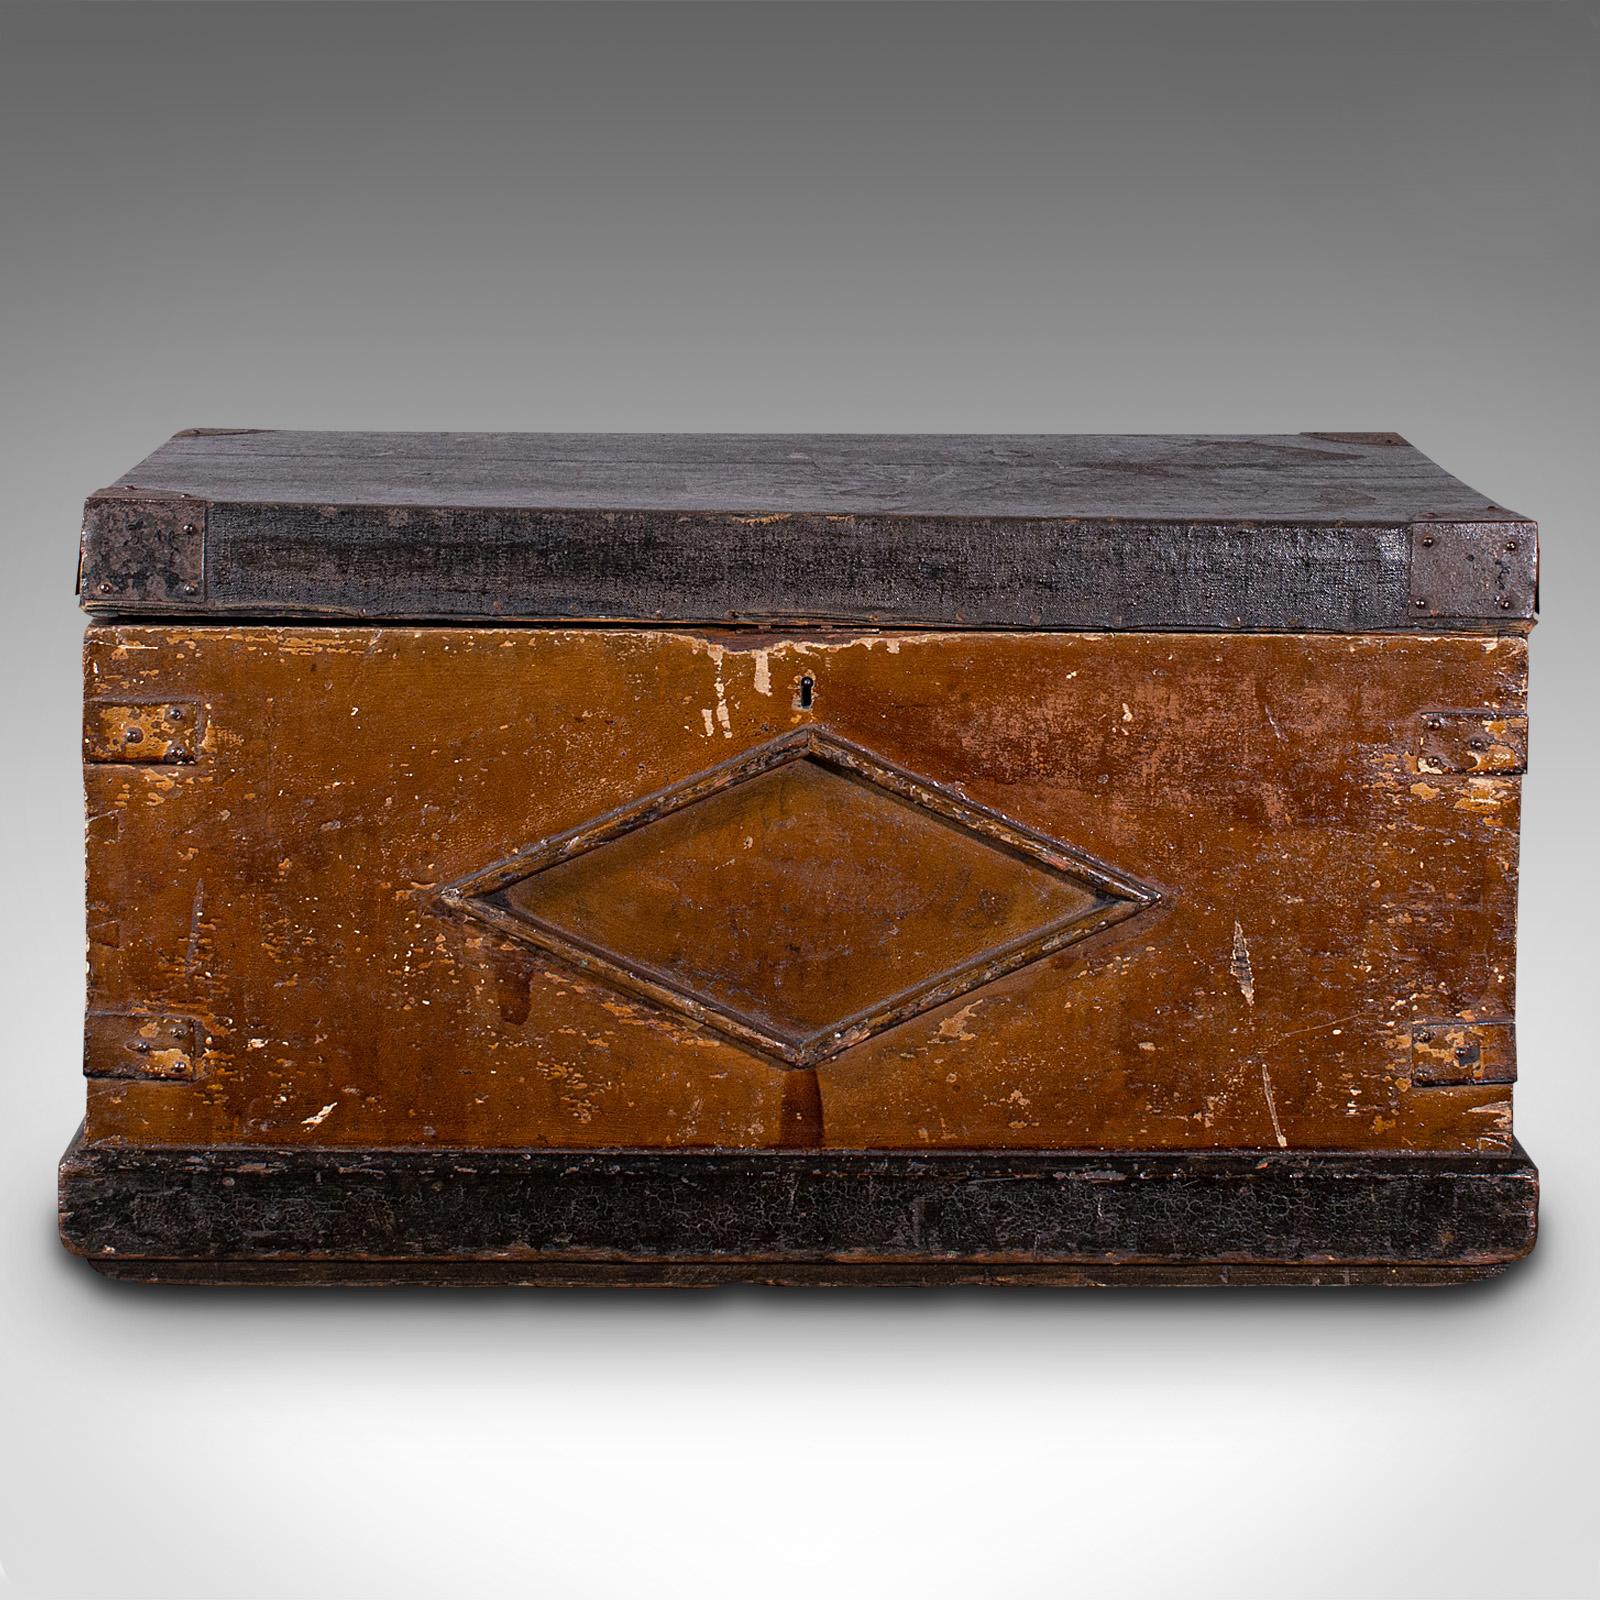 This is an antique craftsman's trunk. An English, pine carpentry or maritime tool chest, dating to the early Victorian period, circa 1850.

Generously sized trunk with considerably robust stocks
Displays a desirable aged patina throughout
Select